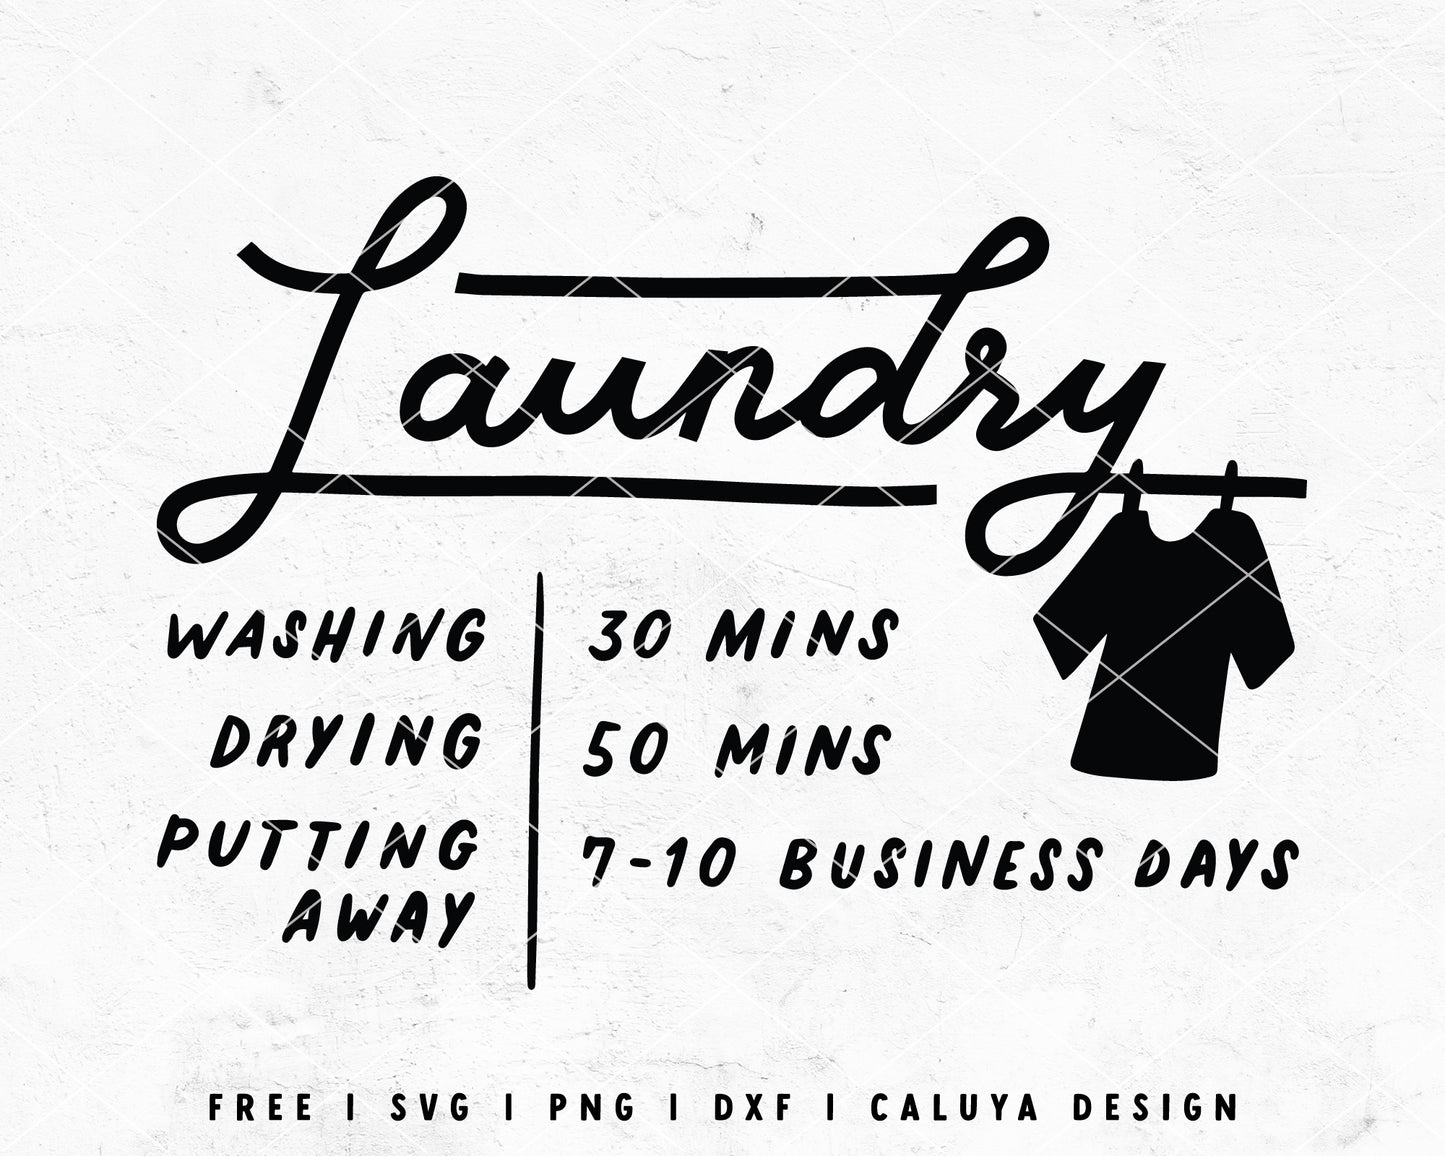 FREE Laundry SVG | Sign Making SVG Cut File for Cricut, Cameo Silhouette | Free SVG Cut File